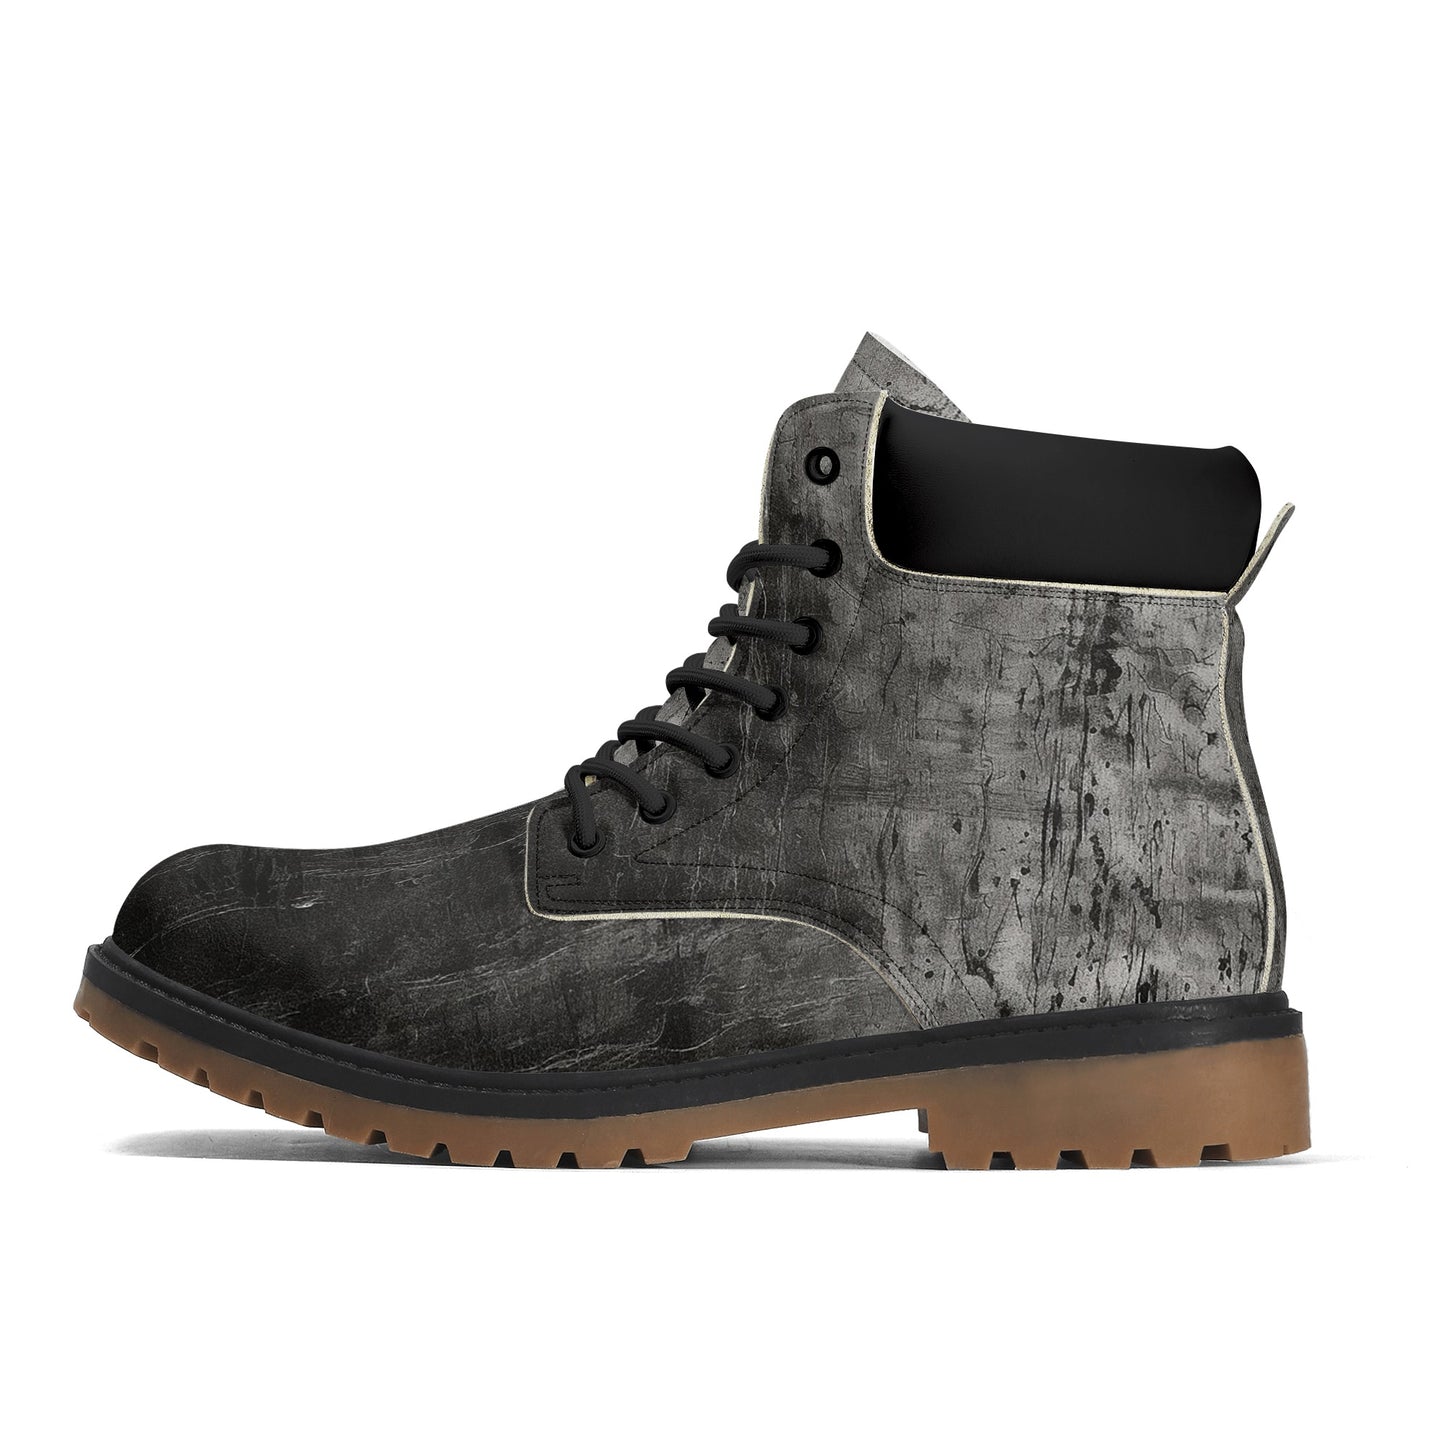 Stylized Grey Leather Brown Outsole All Season Boots